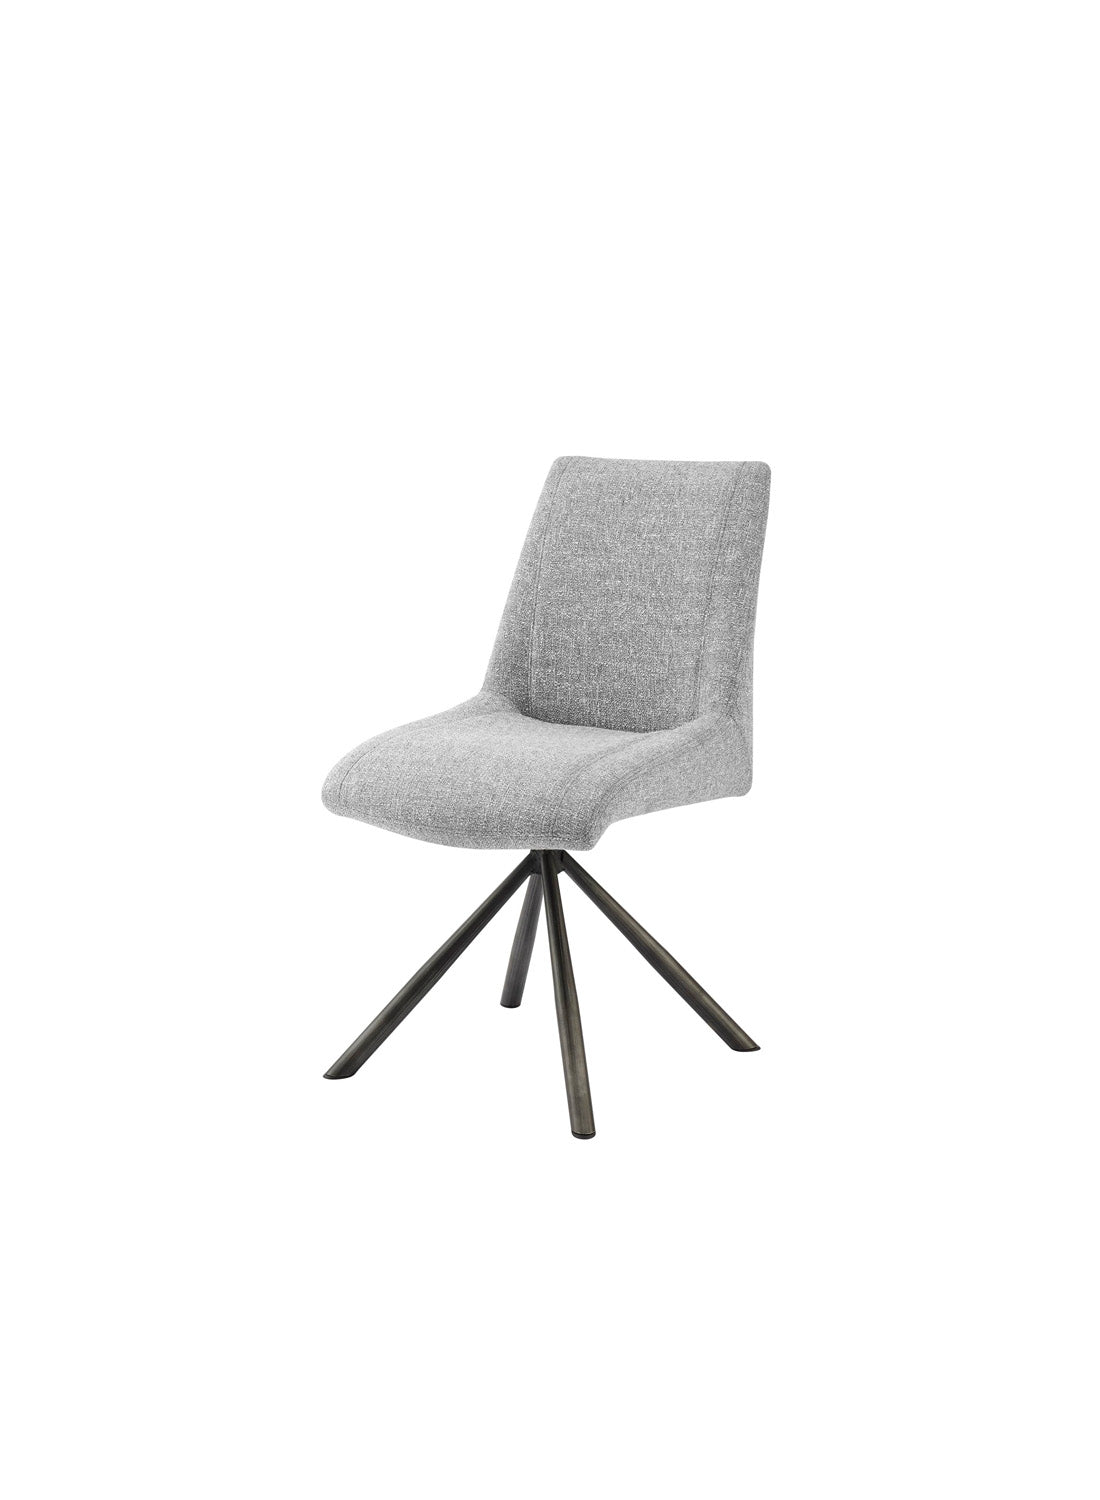 Eliot Dining Chair, light gray